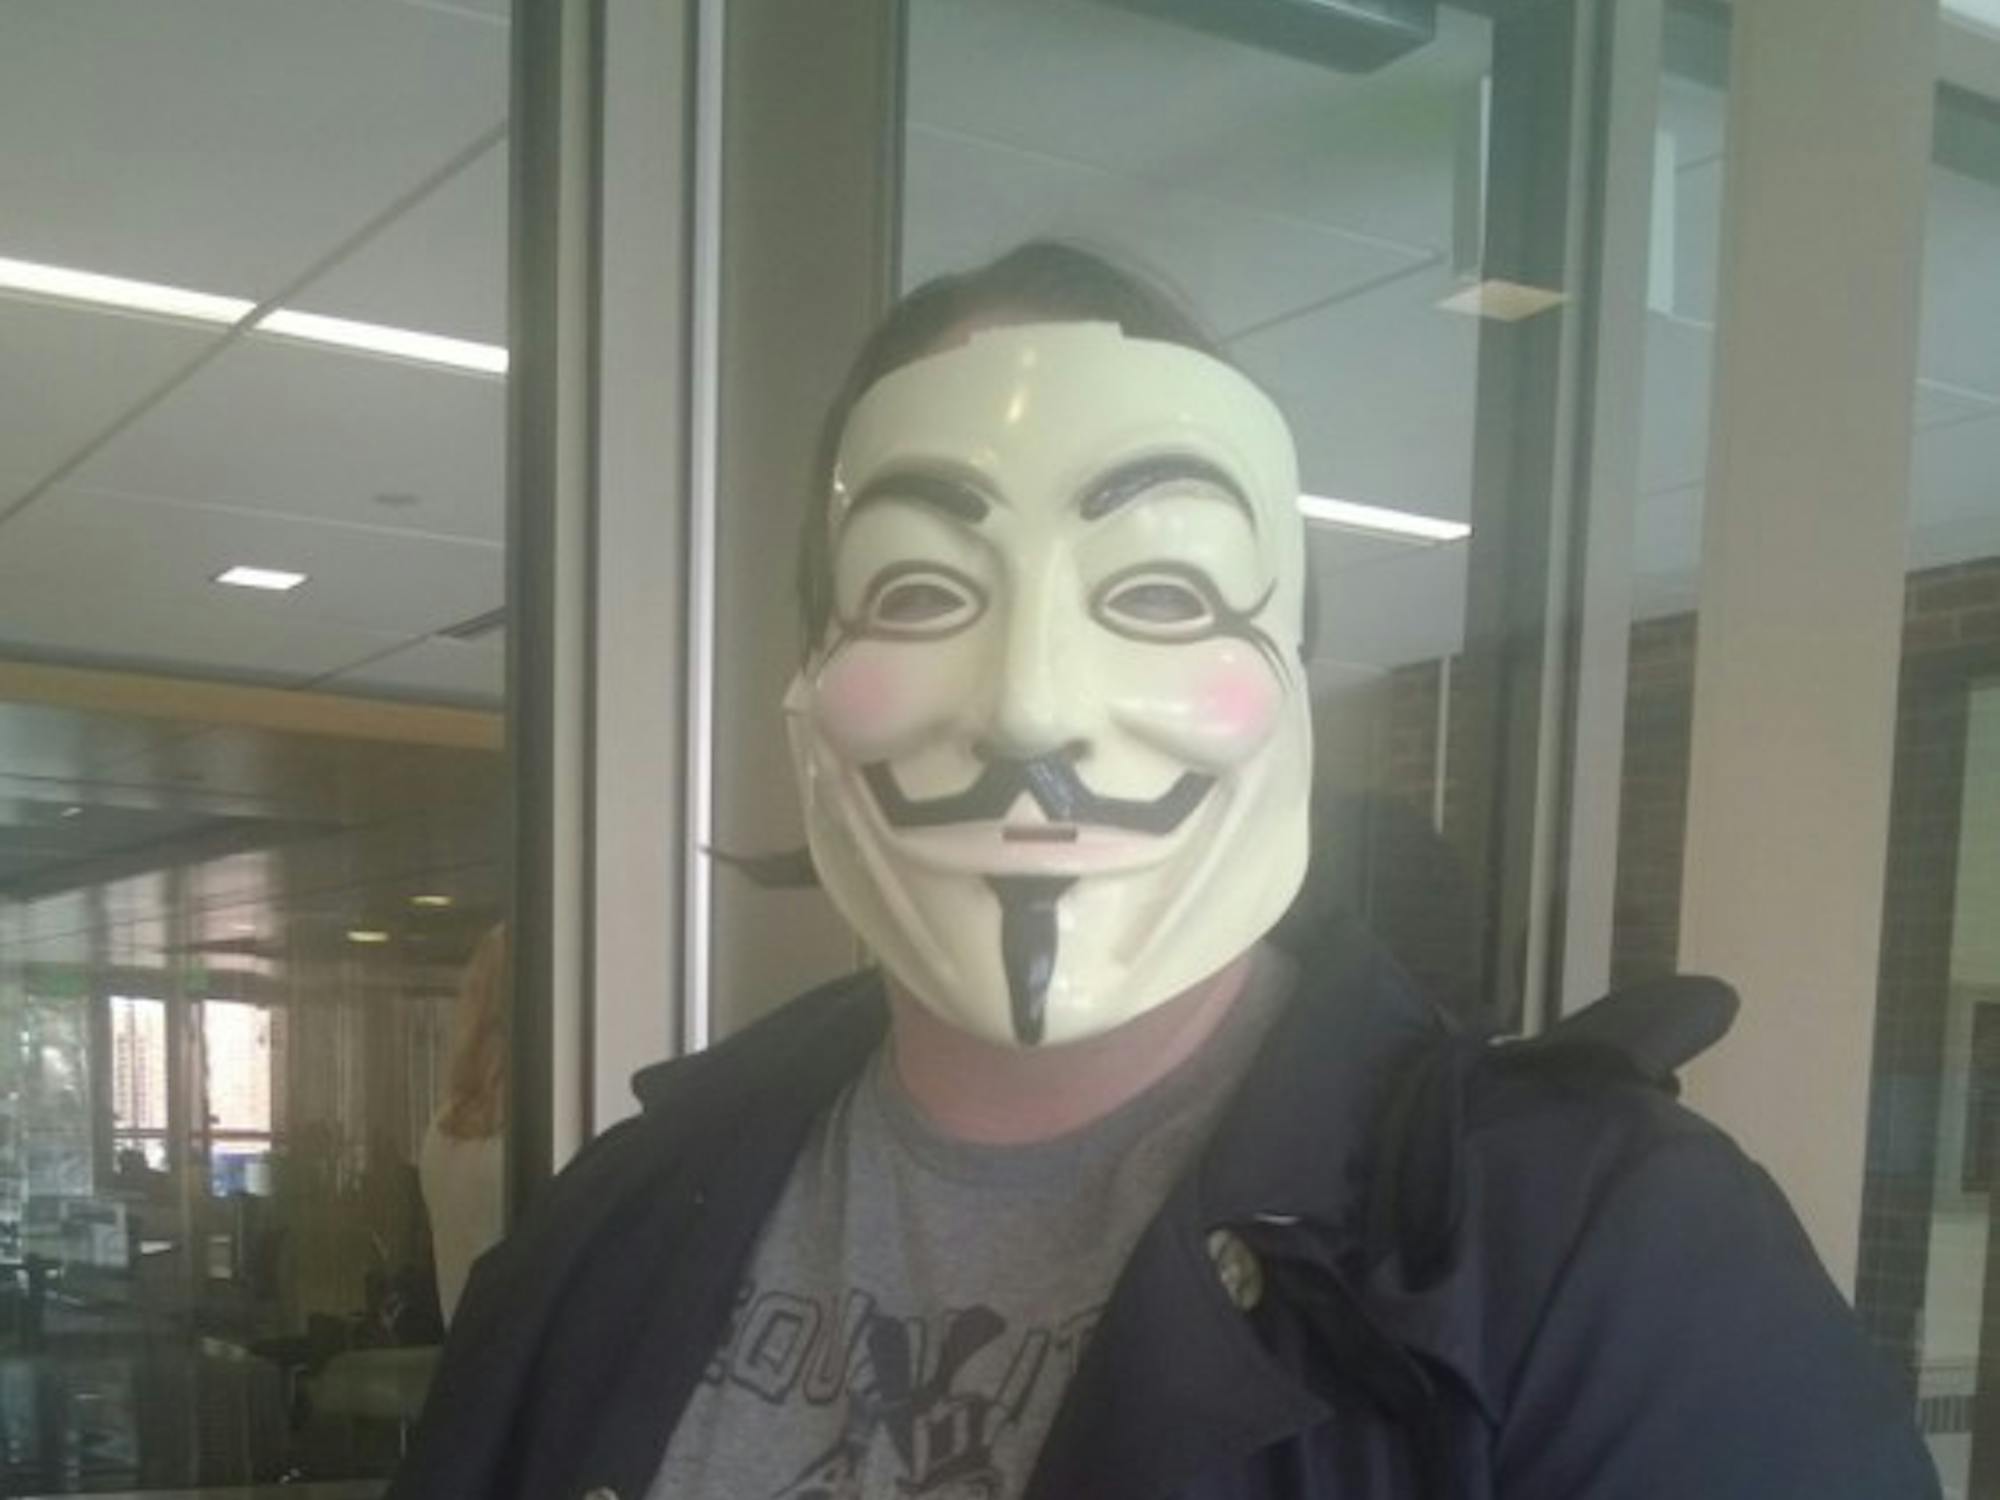 Some students came with a Guy Fawkes mask to get into the spirit of the film.&nbsp;